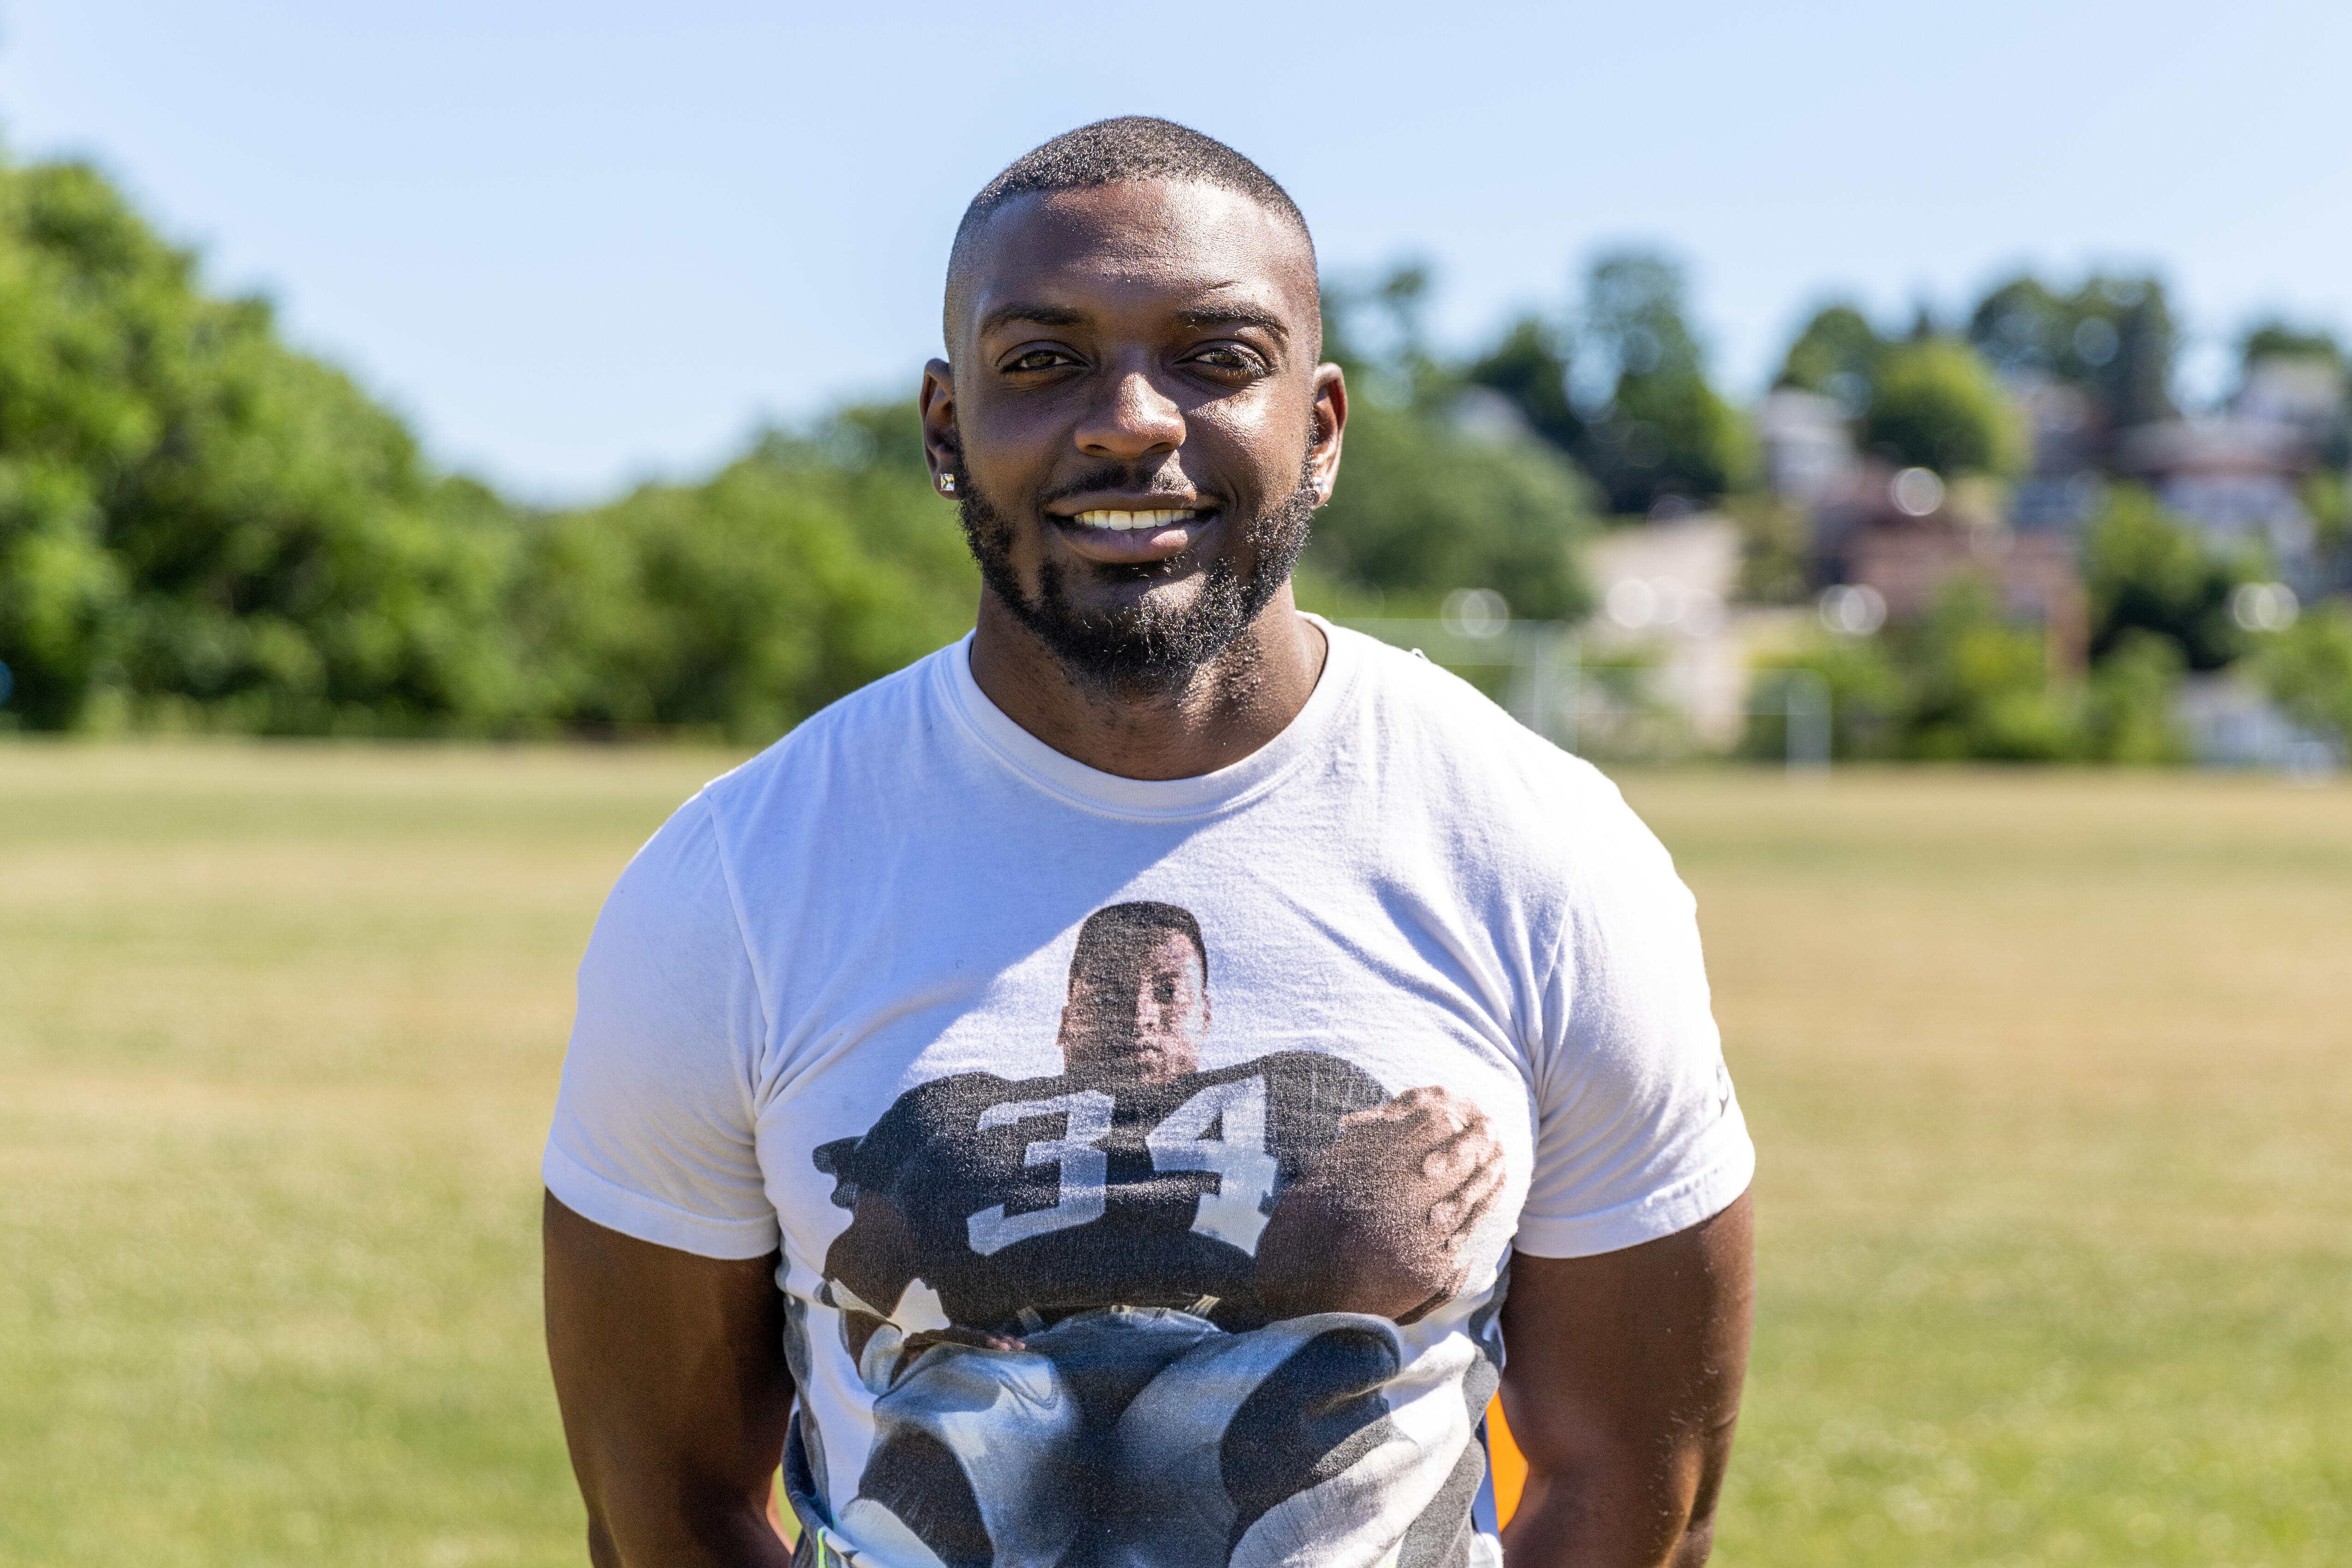 Steel Valley Middle School football coach Dontez Williams poses on the team practice field.